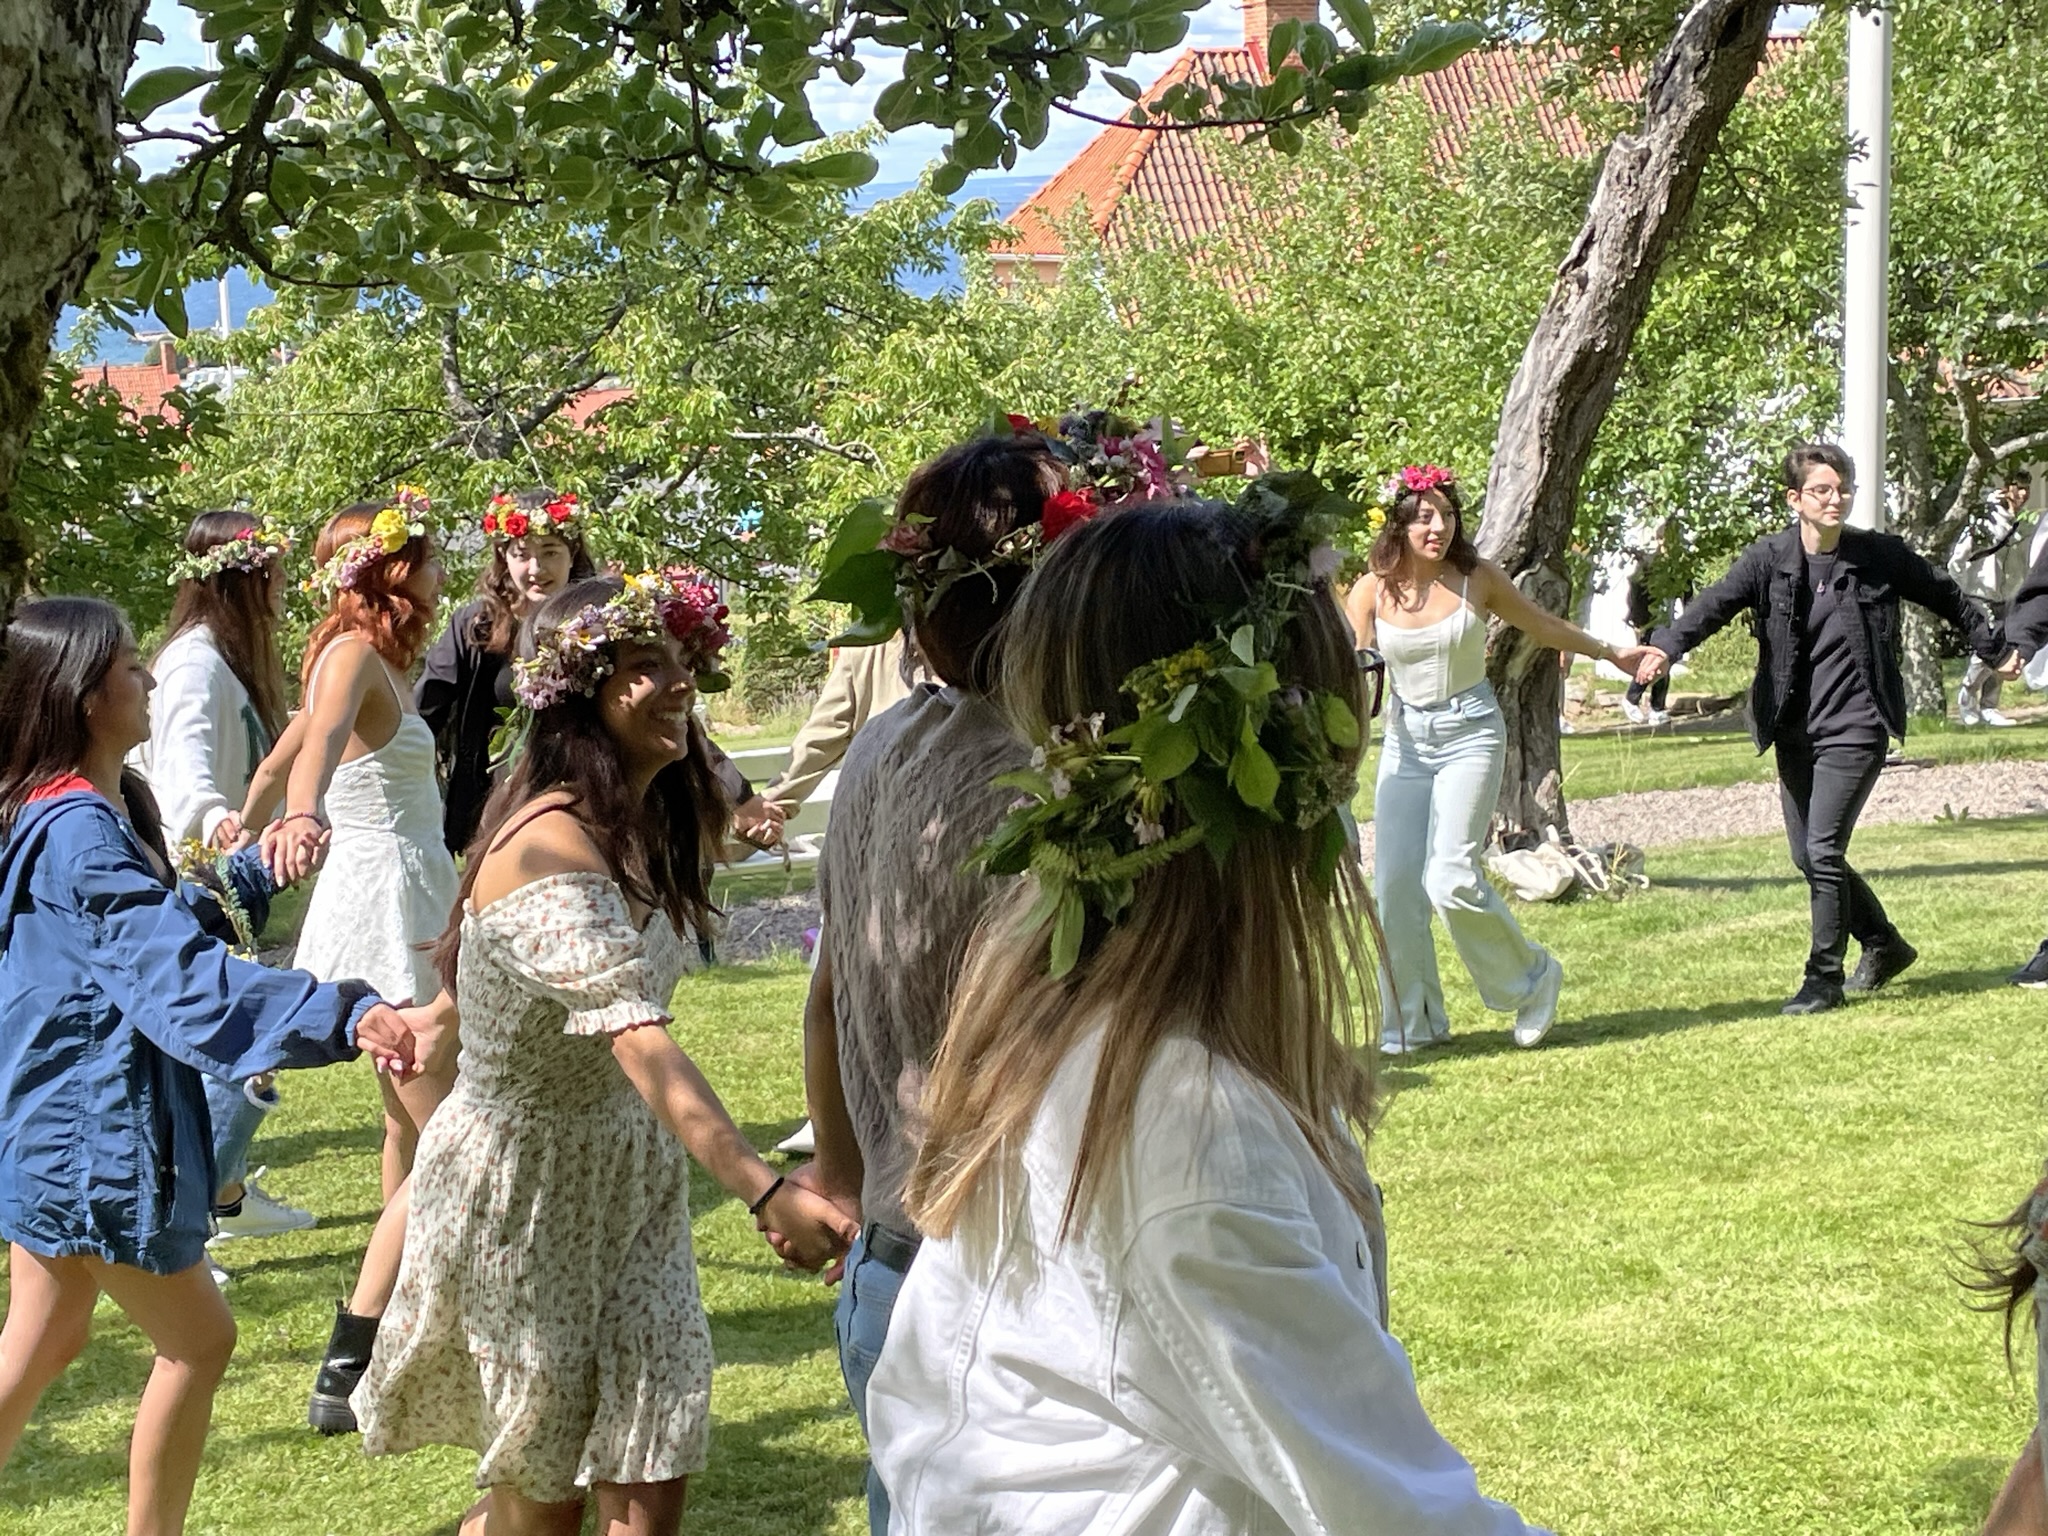 Dancing around the midsummer pole is a Swedish tradition